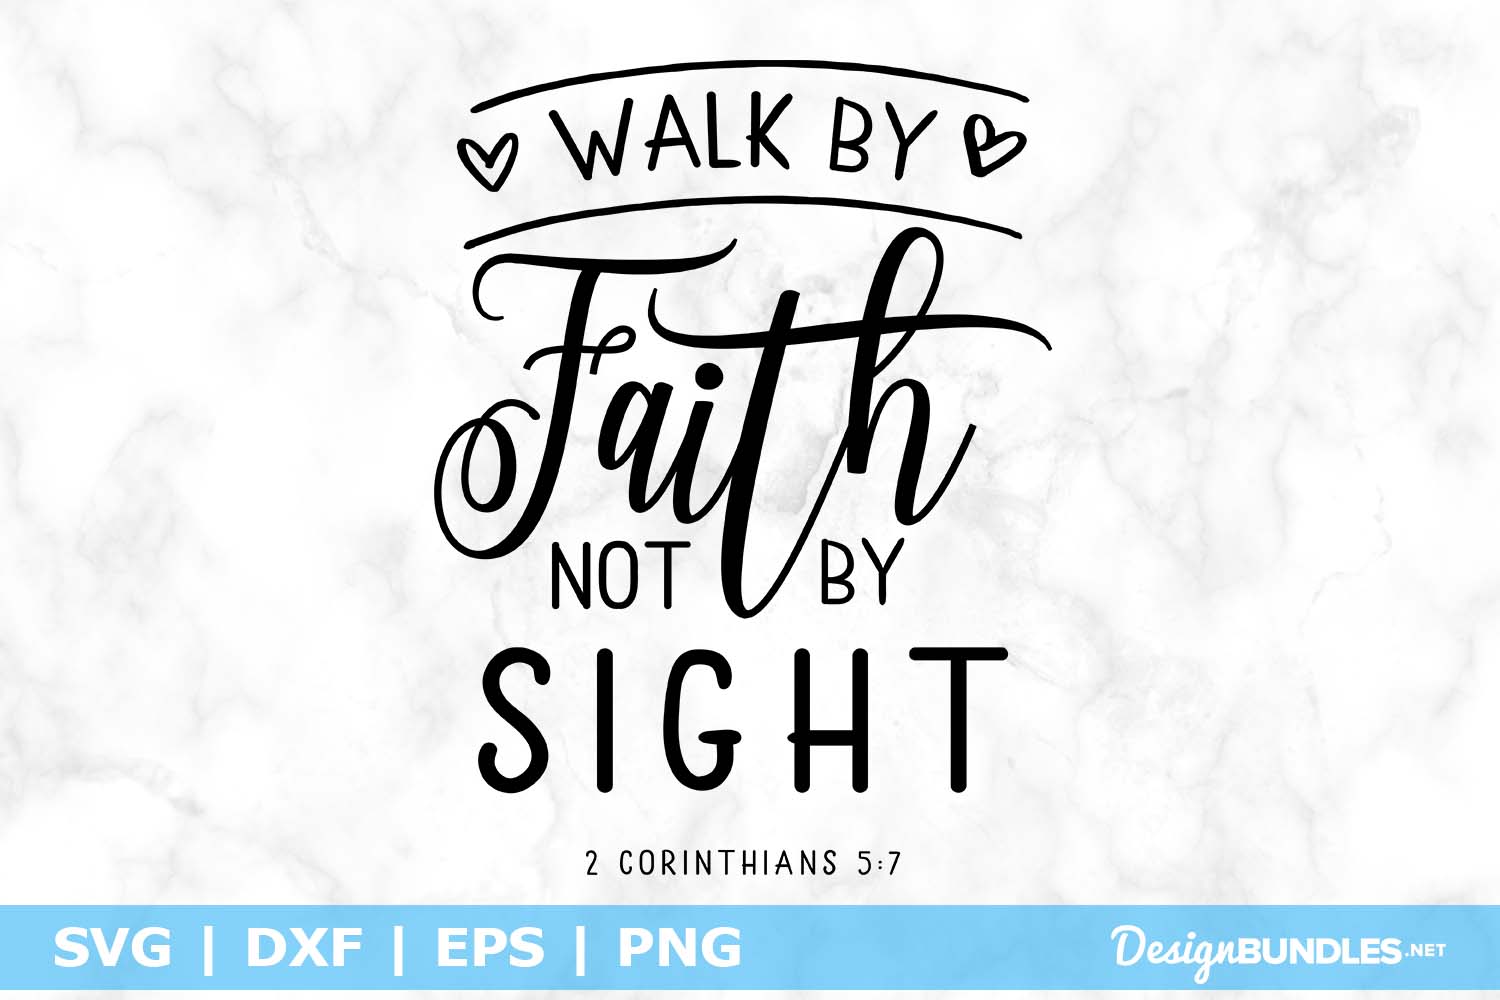 Walk by faith not by sight SVG File